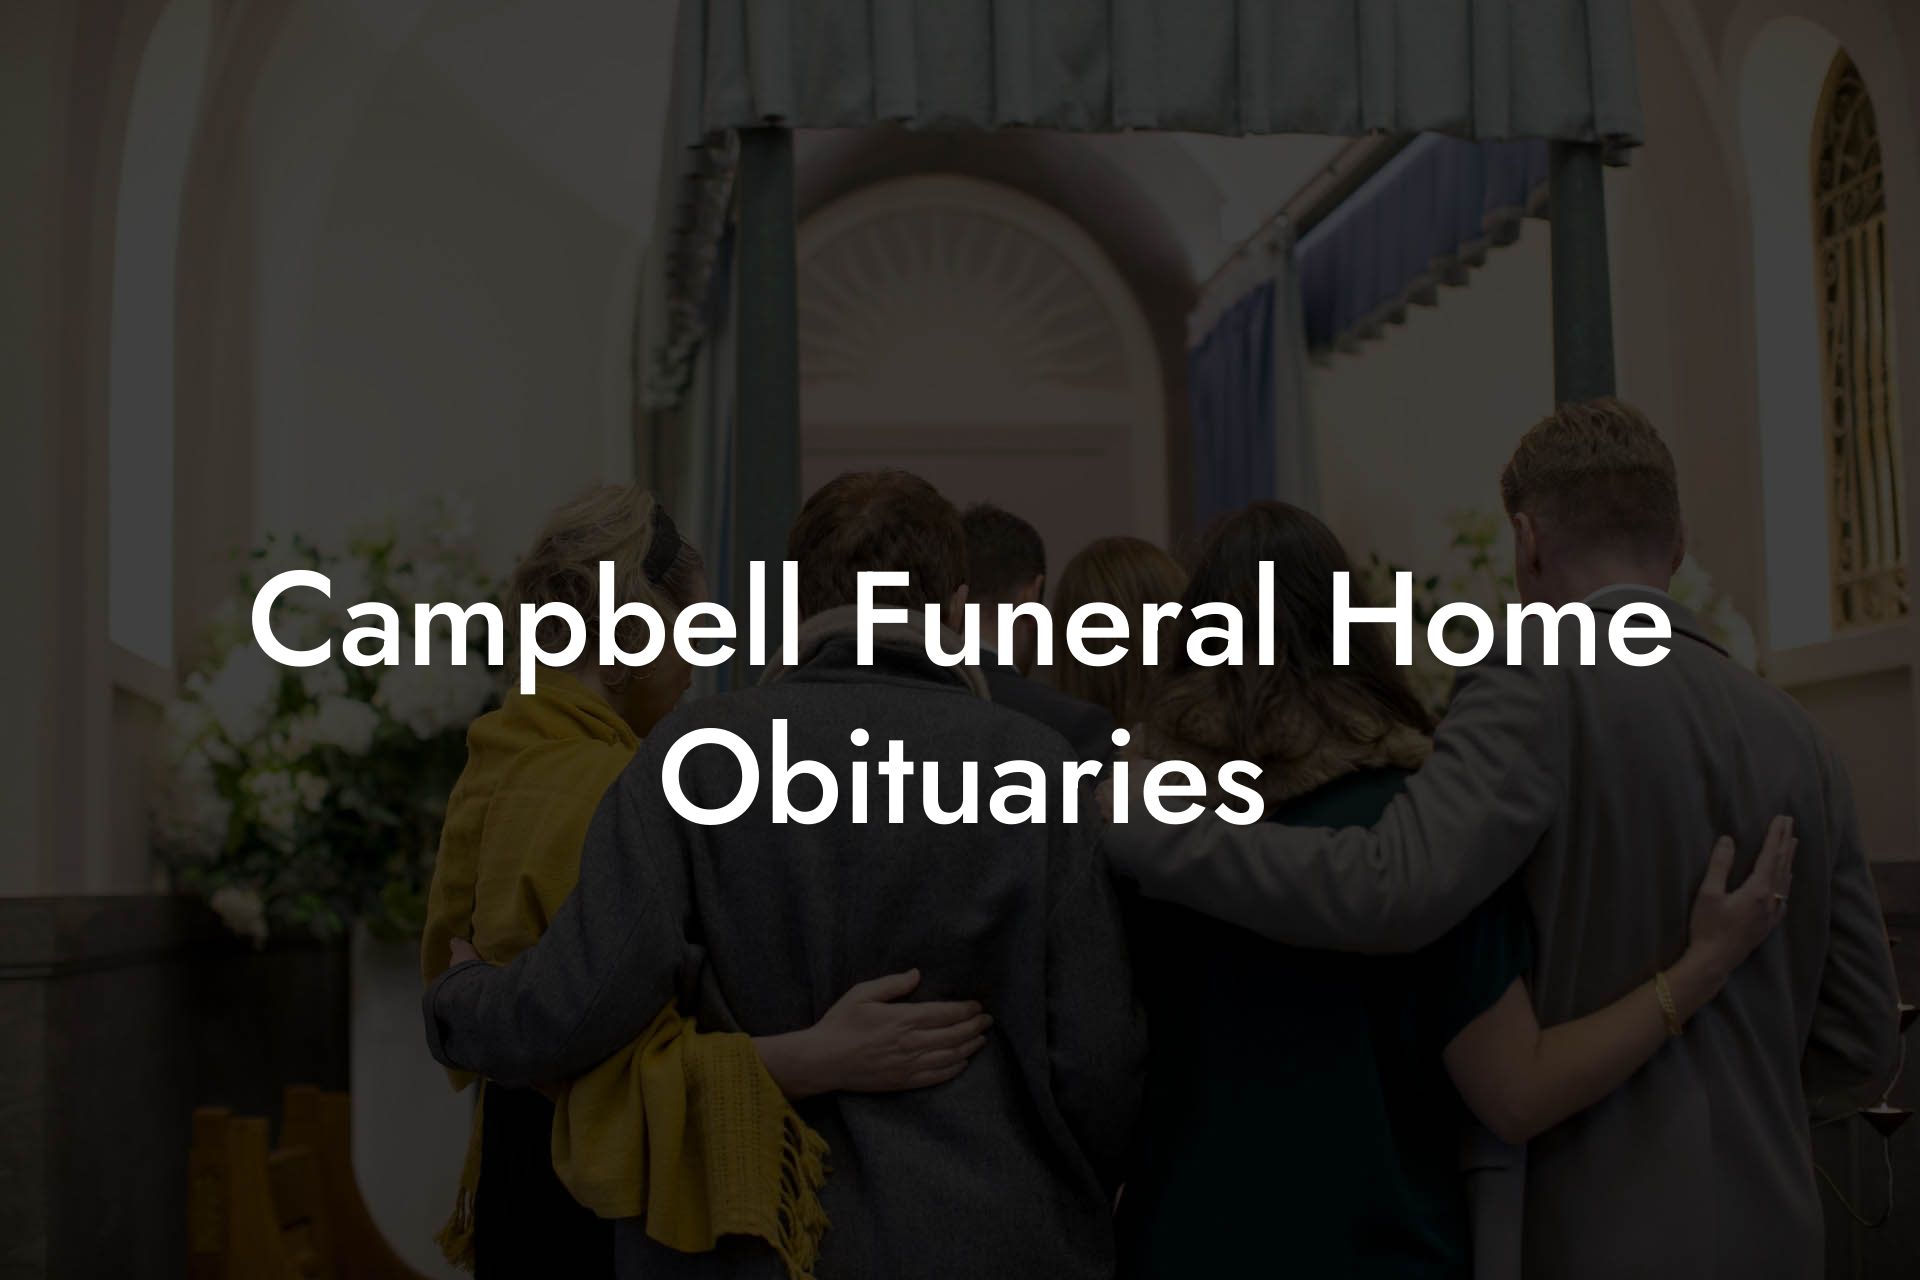 Campbell Funeral Home Obituaries